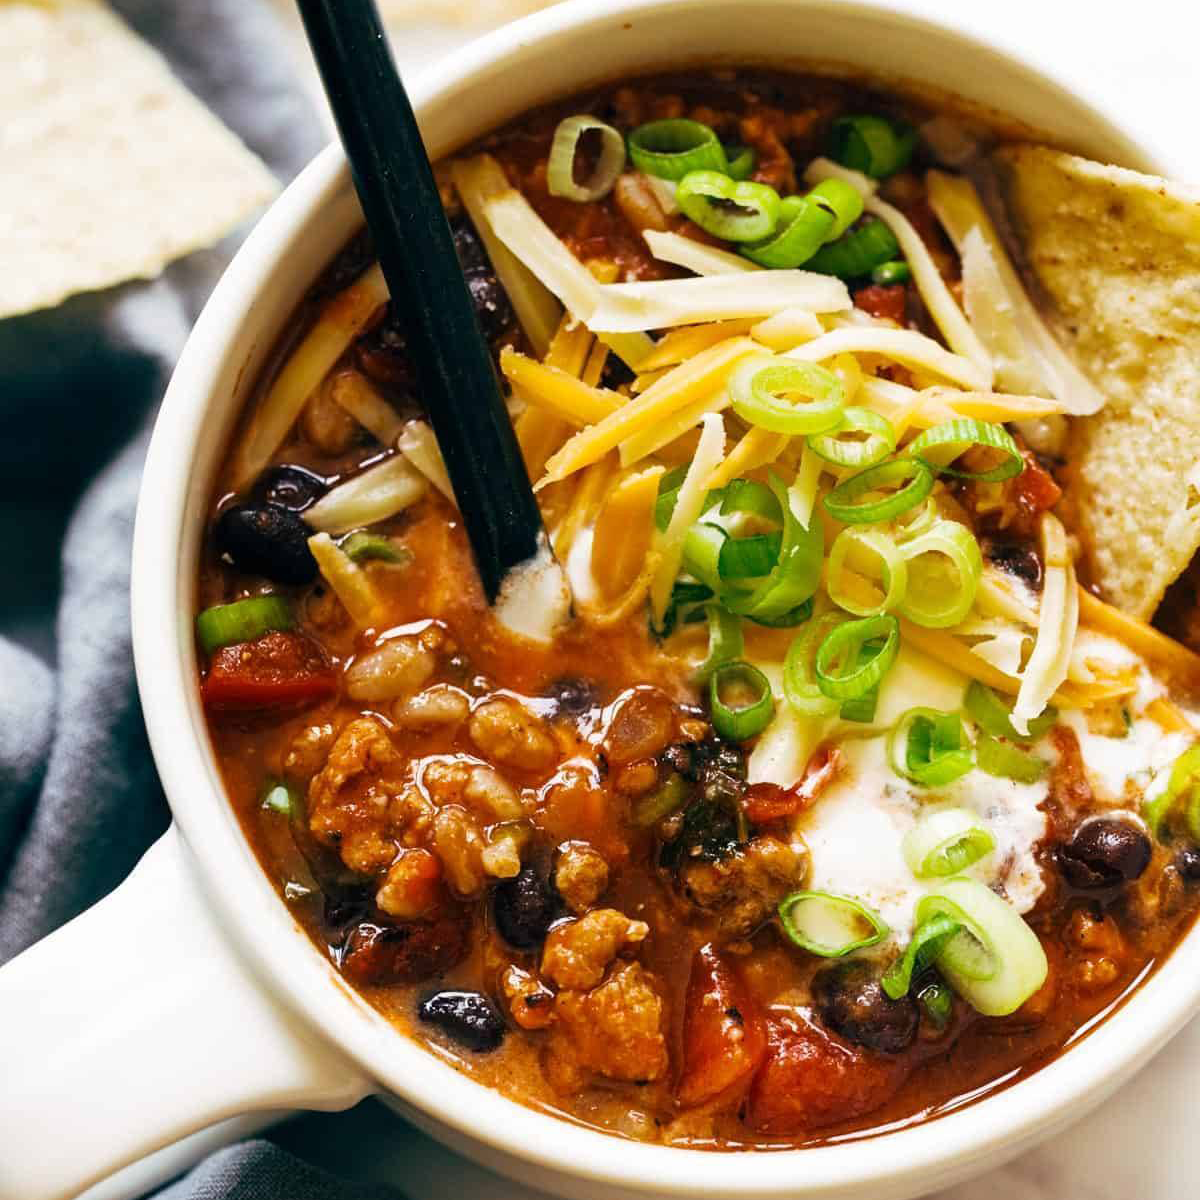 Turkey chili in a bowl with cheese and green onions.